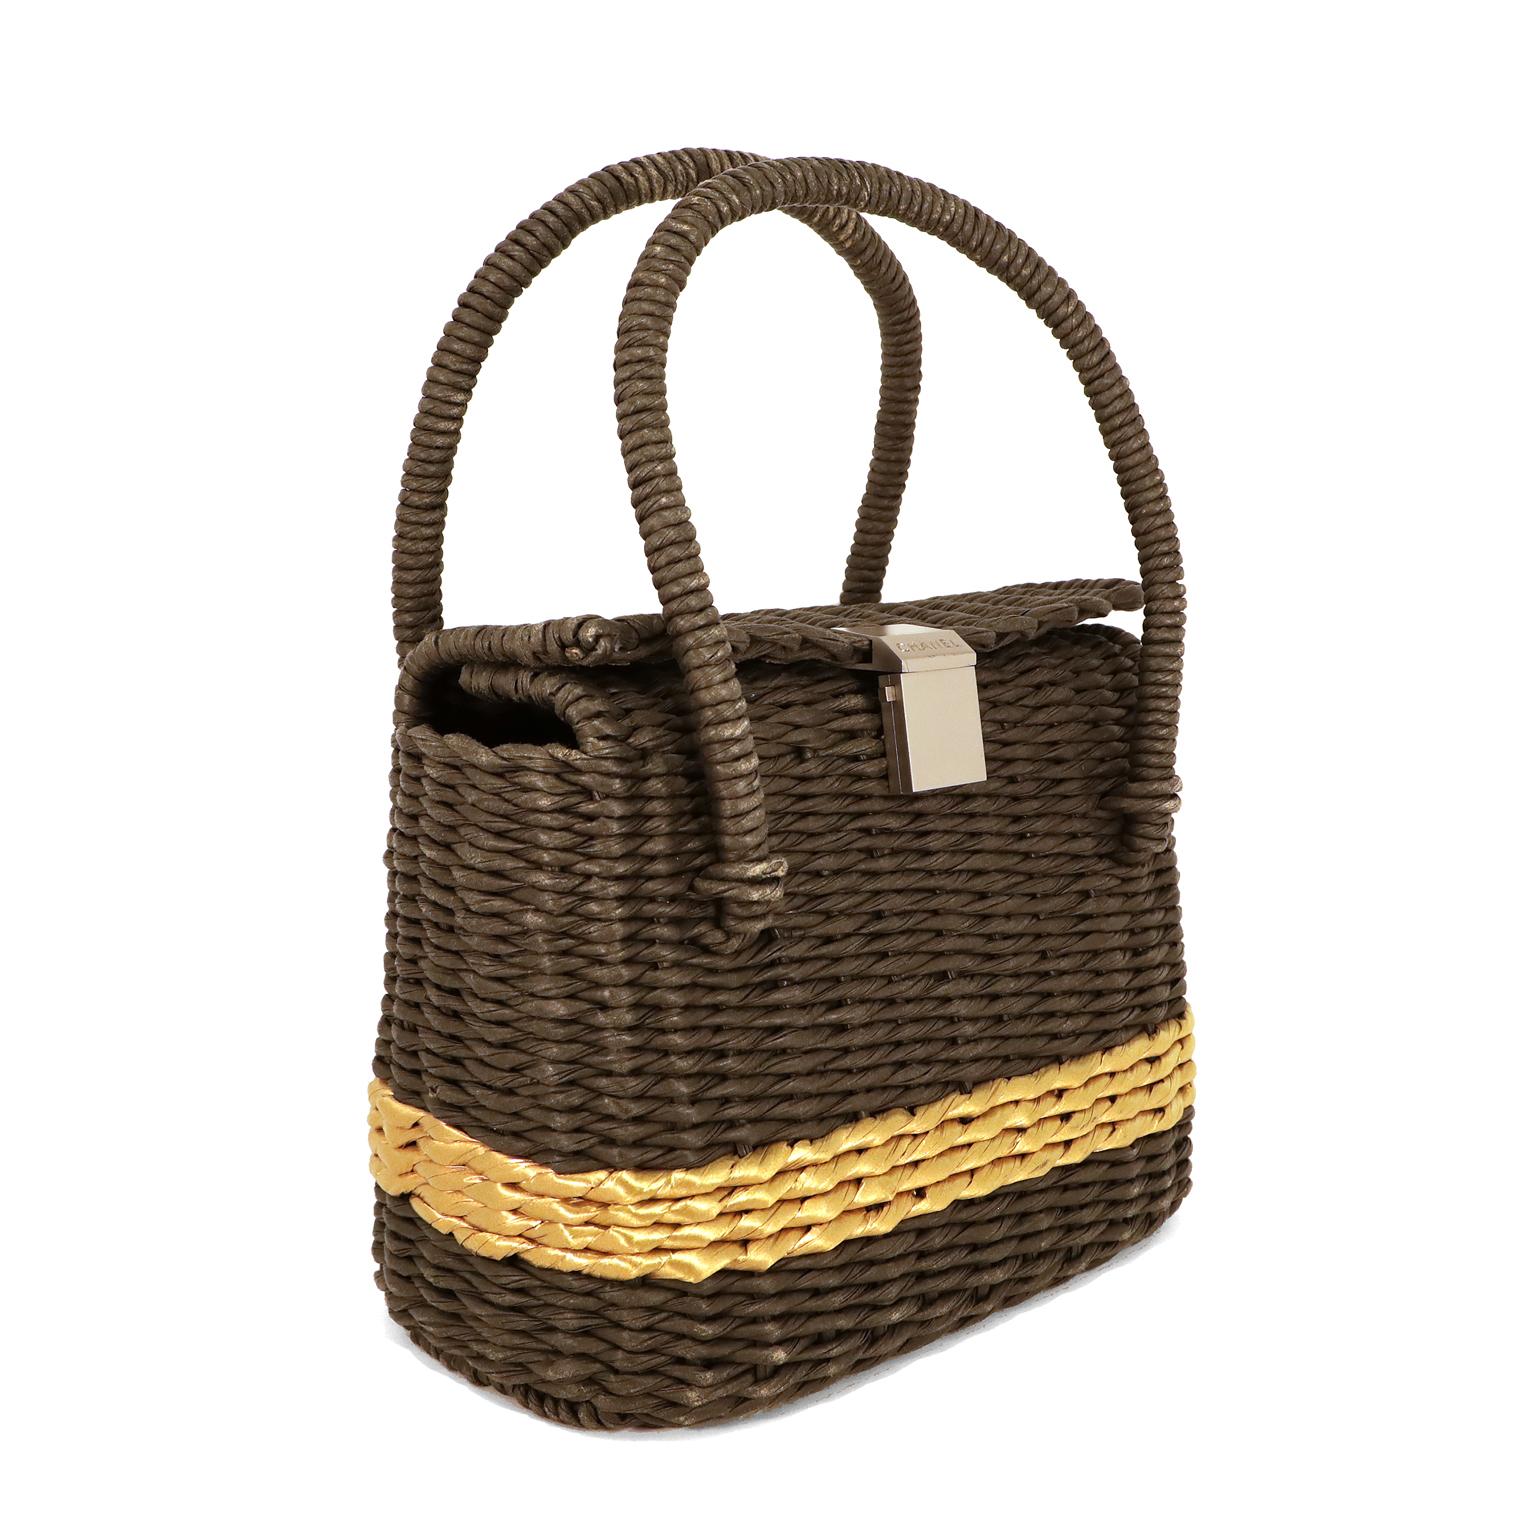 Chanel Black and Gold Wicker Basket Bag  In Excellent Condition For Sale In Palm Beach, FL